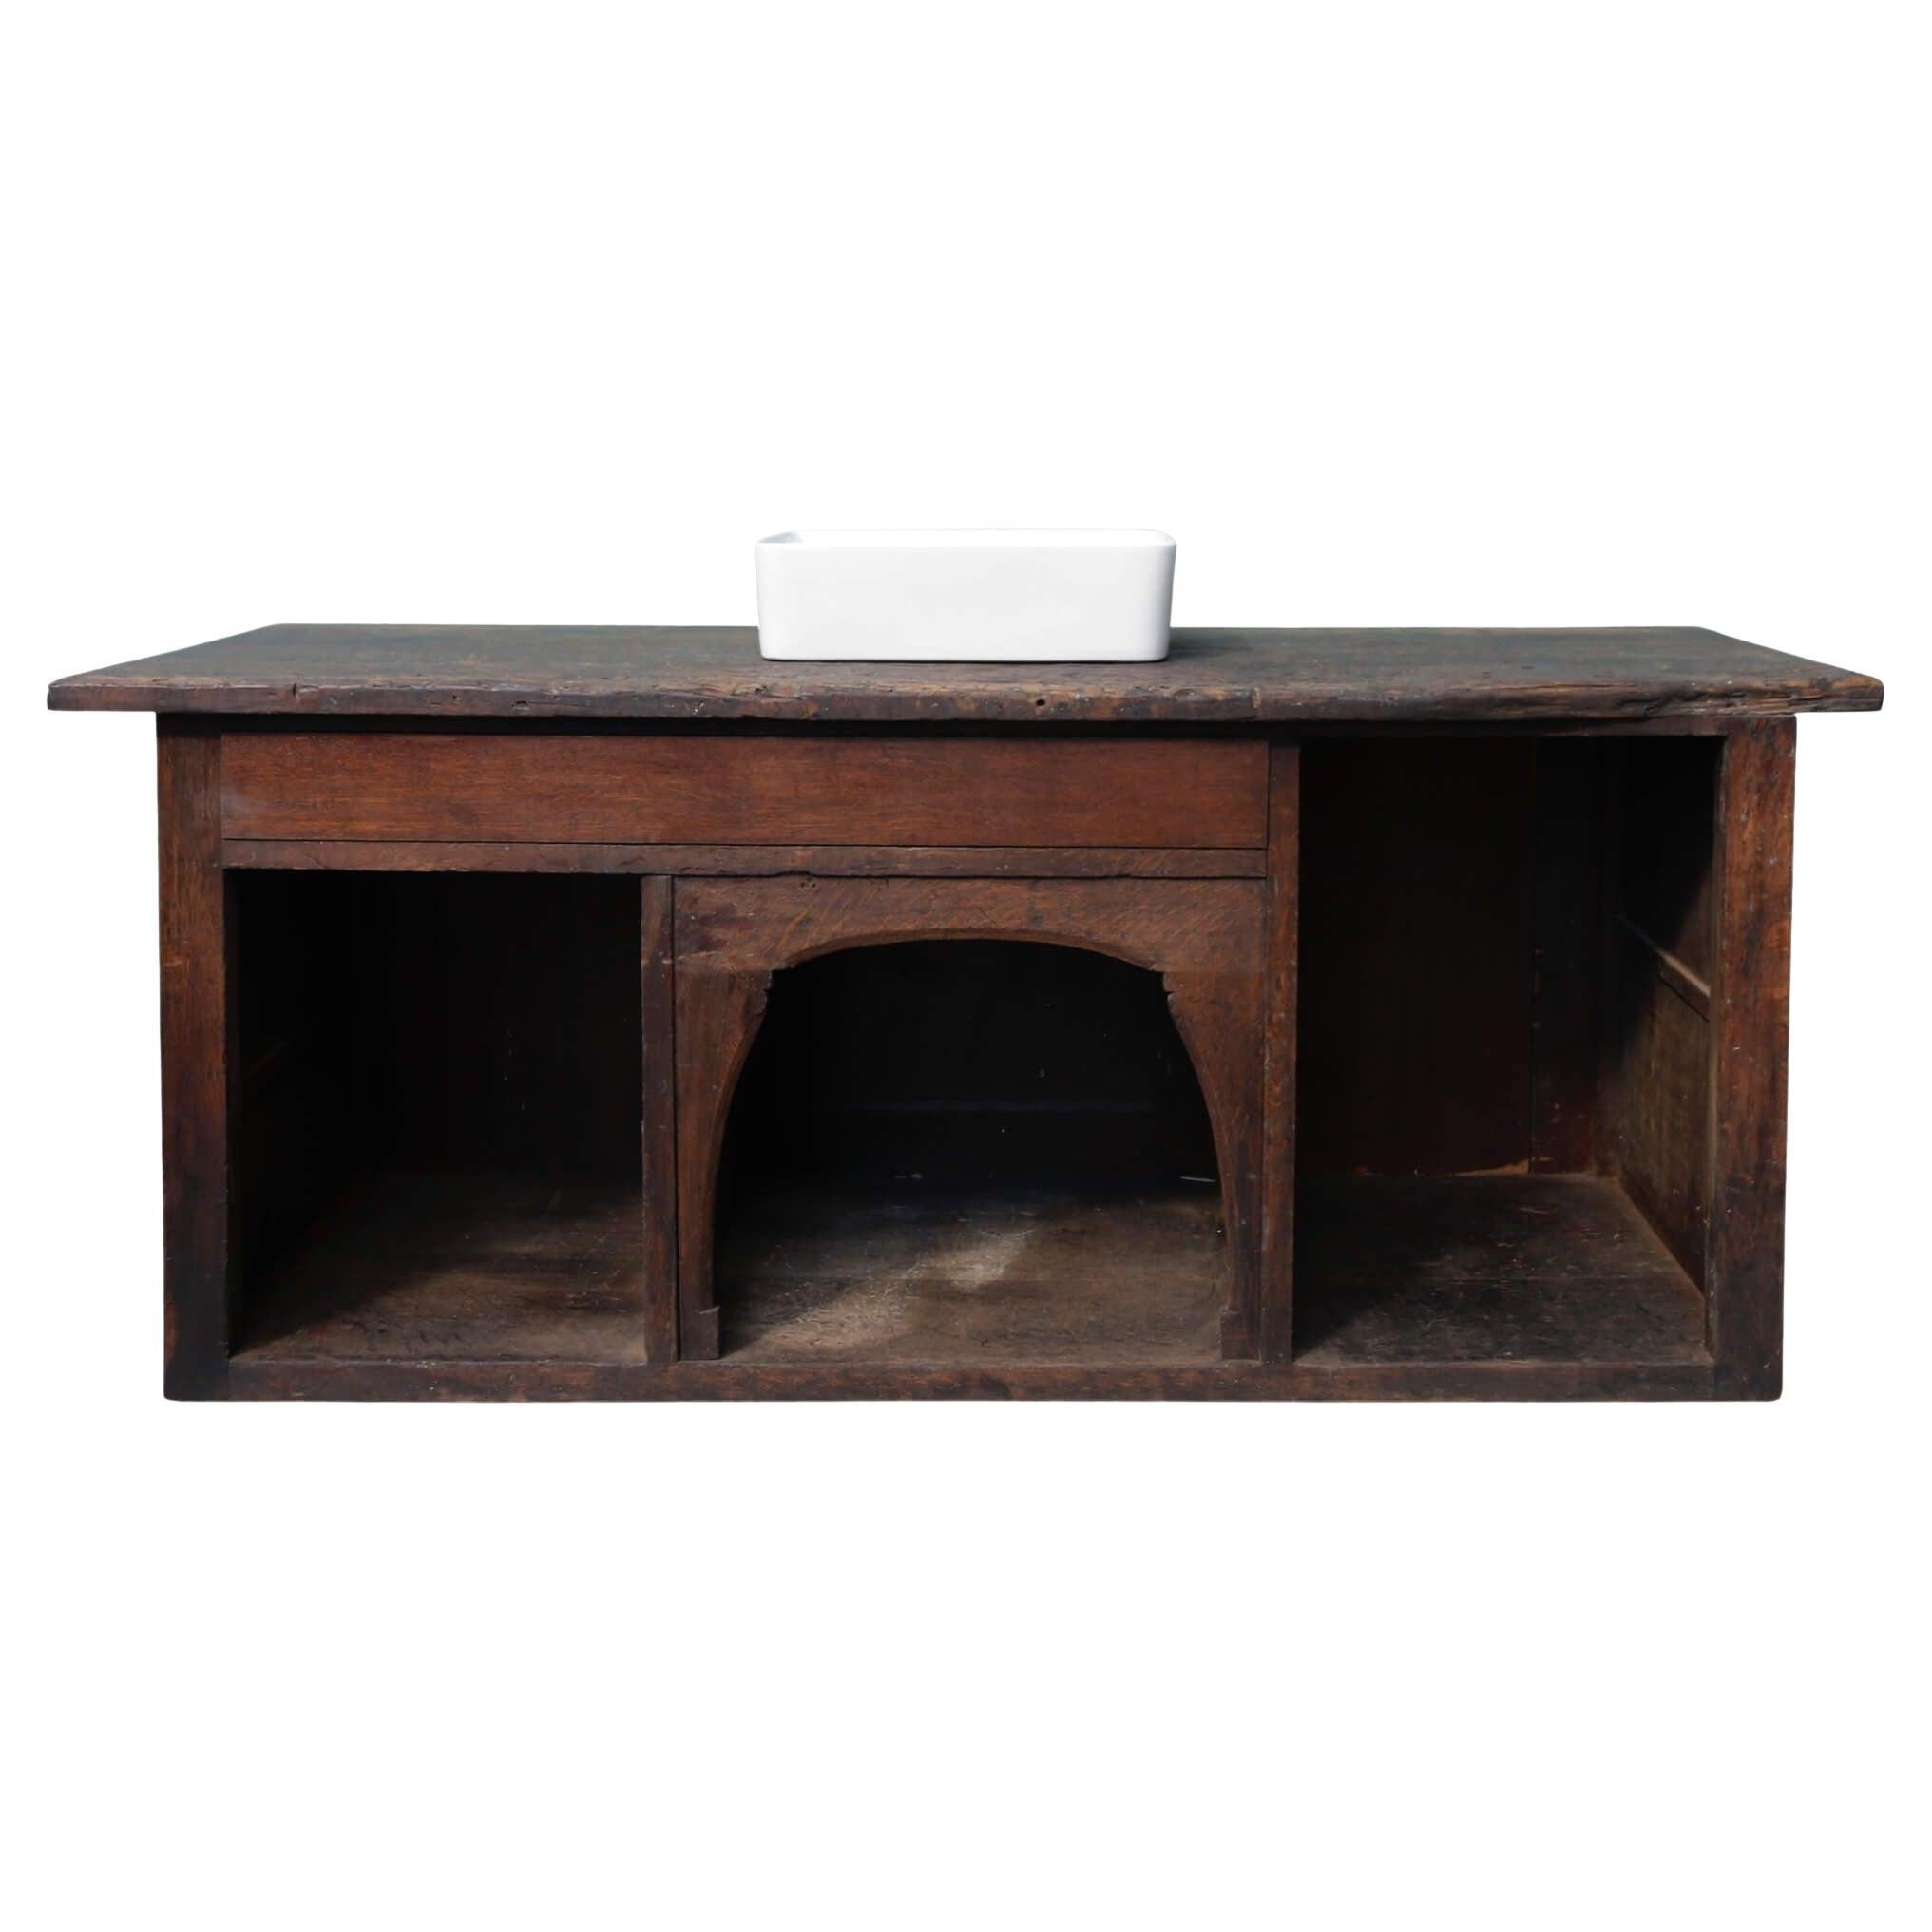 Reclaimed Oak Unit with Utility Basin For Sale